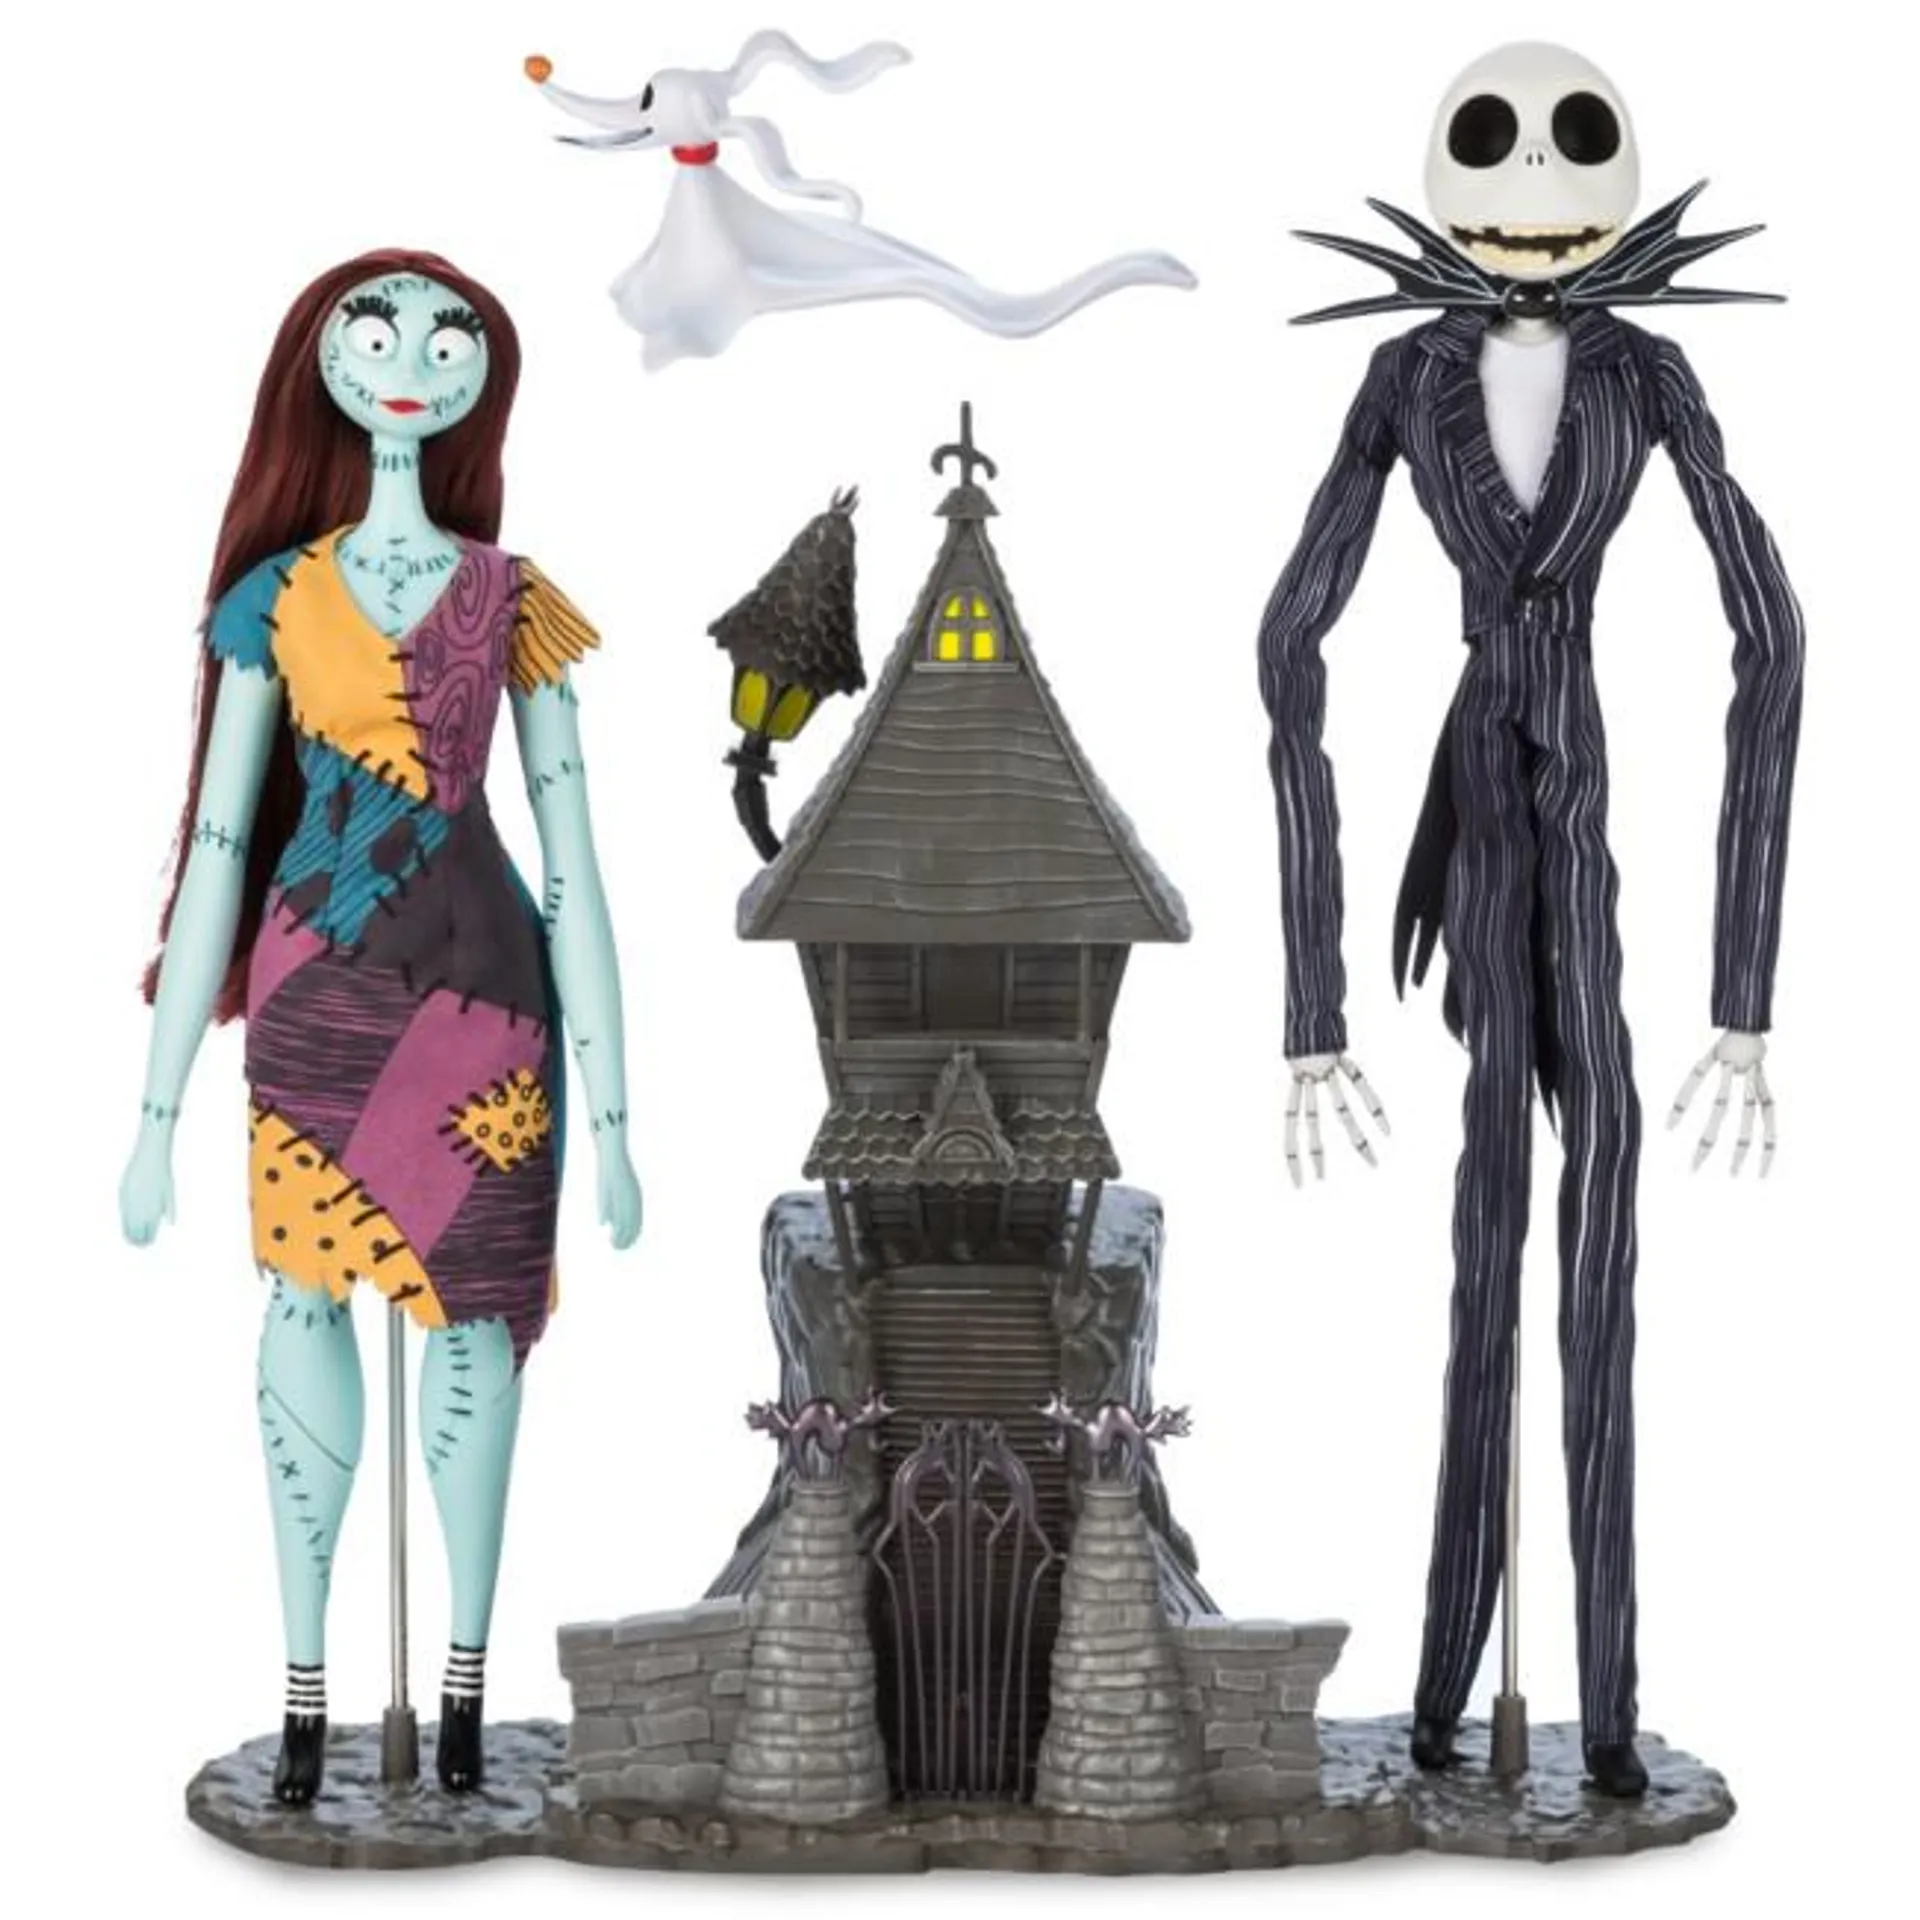 Tim Burton's The Nightmare Before Christmas 30th Anniversary Limited Edition Doll Set